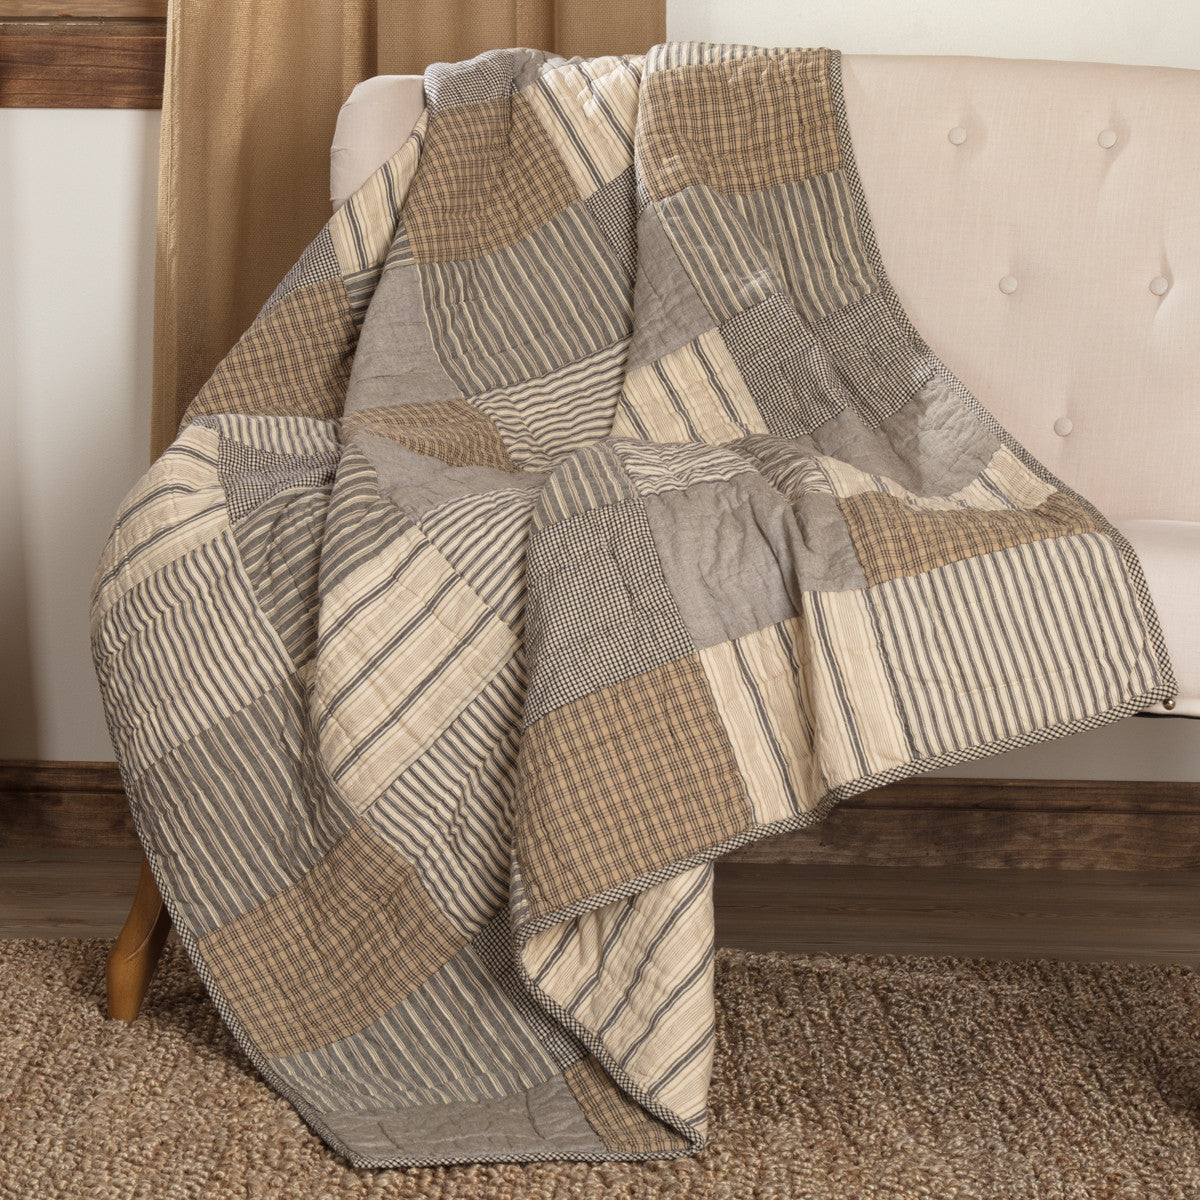 Sawyer Mill Charcoal Quilted Collection